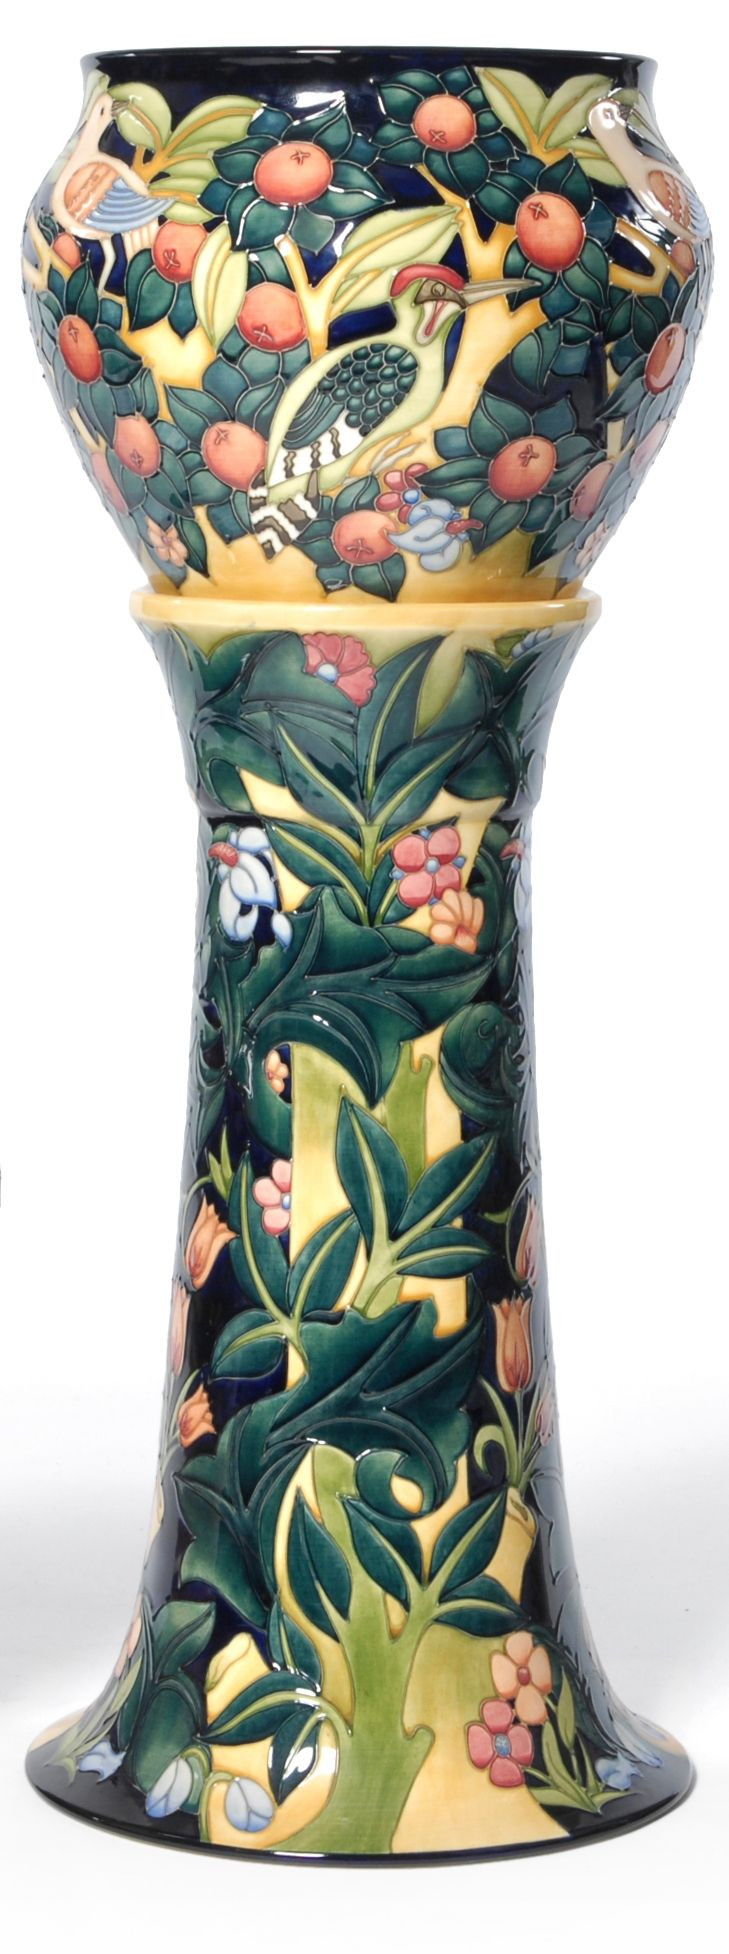 20 Ideal Lenox Masterpiece Small Vase 2024 free download lenox masterpiece small vase of 222 best vases images on pinterest ceramic art flower vases and intended for tree bark thief jardiniere and stand